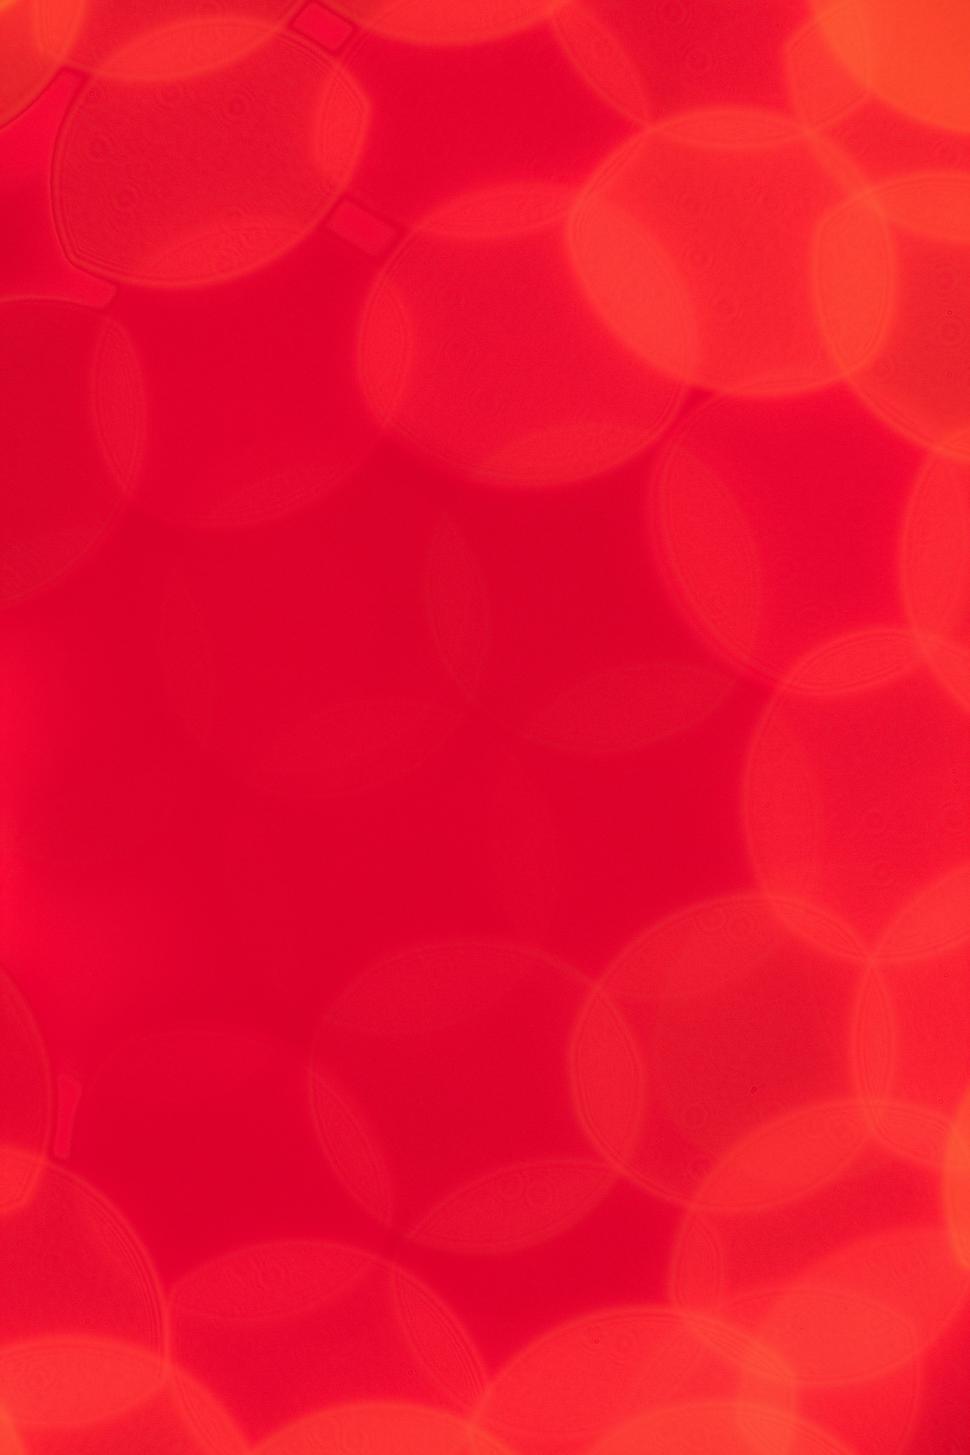 Free Image of Red Lights  